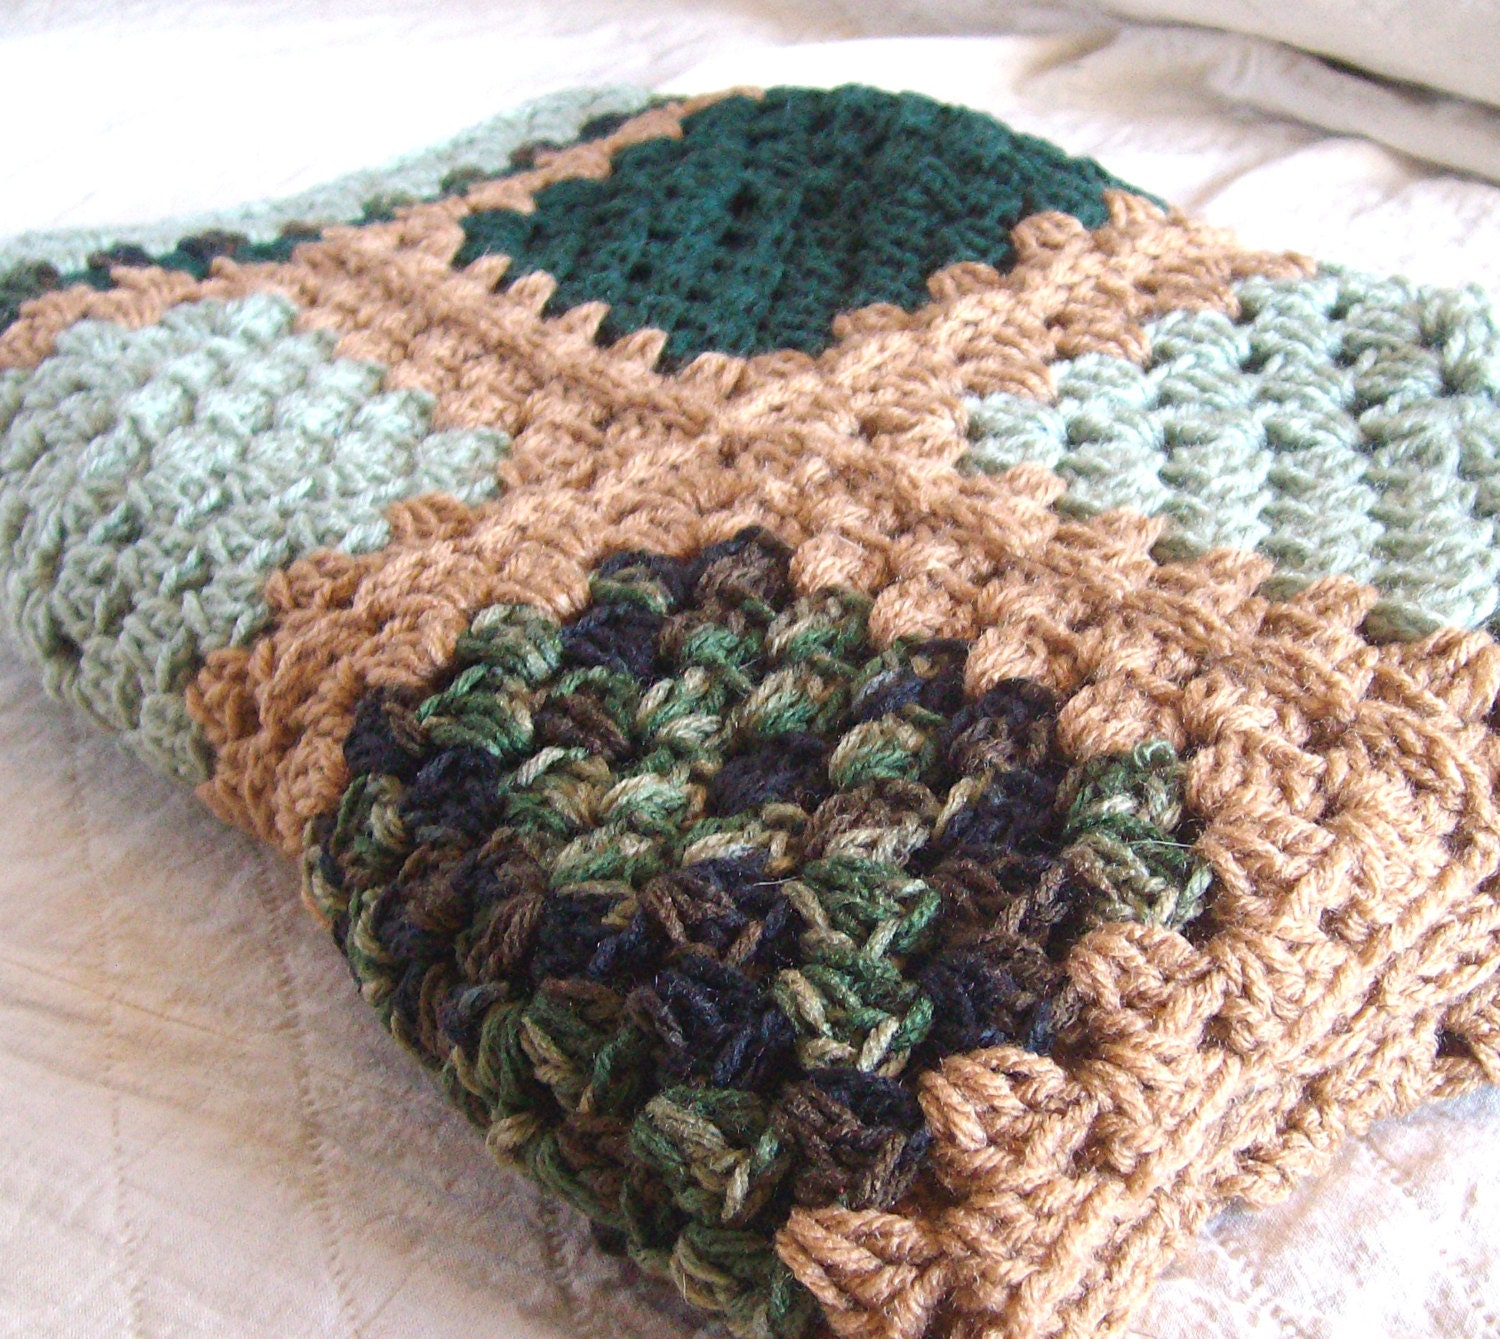 Crochet Granny Square Blanket- Granny Square Afghan / Moss Green Brown Forest Green Crochet Blanket - Rustic Cabin Decor 36" x 47" - ThePrairieCottage